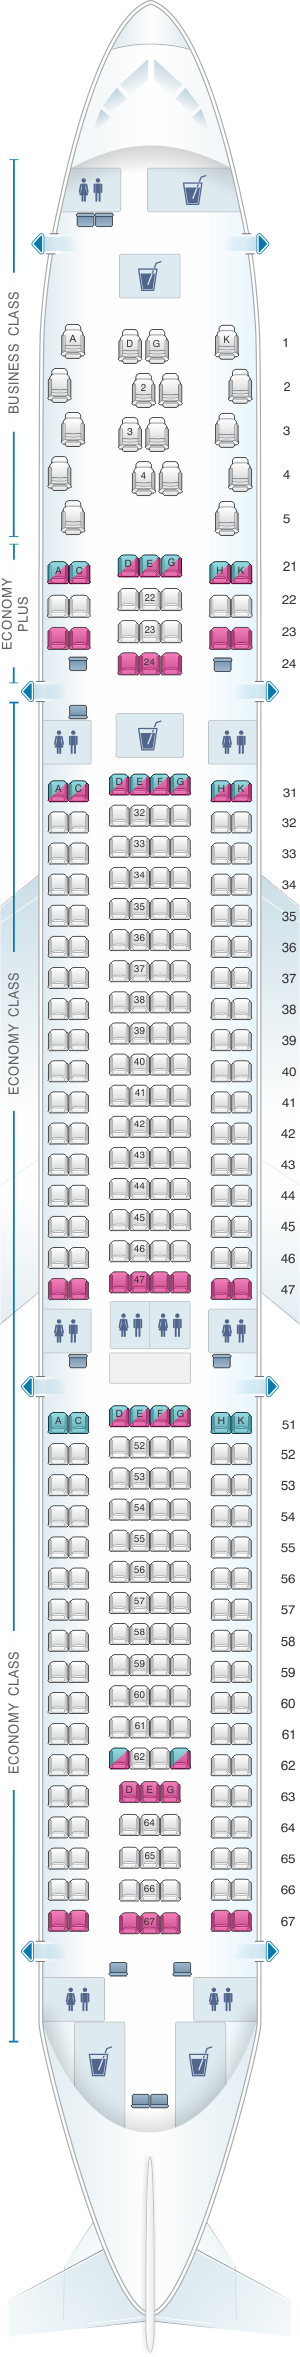 Seat map for Philippine Airlines Airbus A330 300 309pax